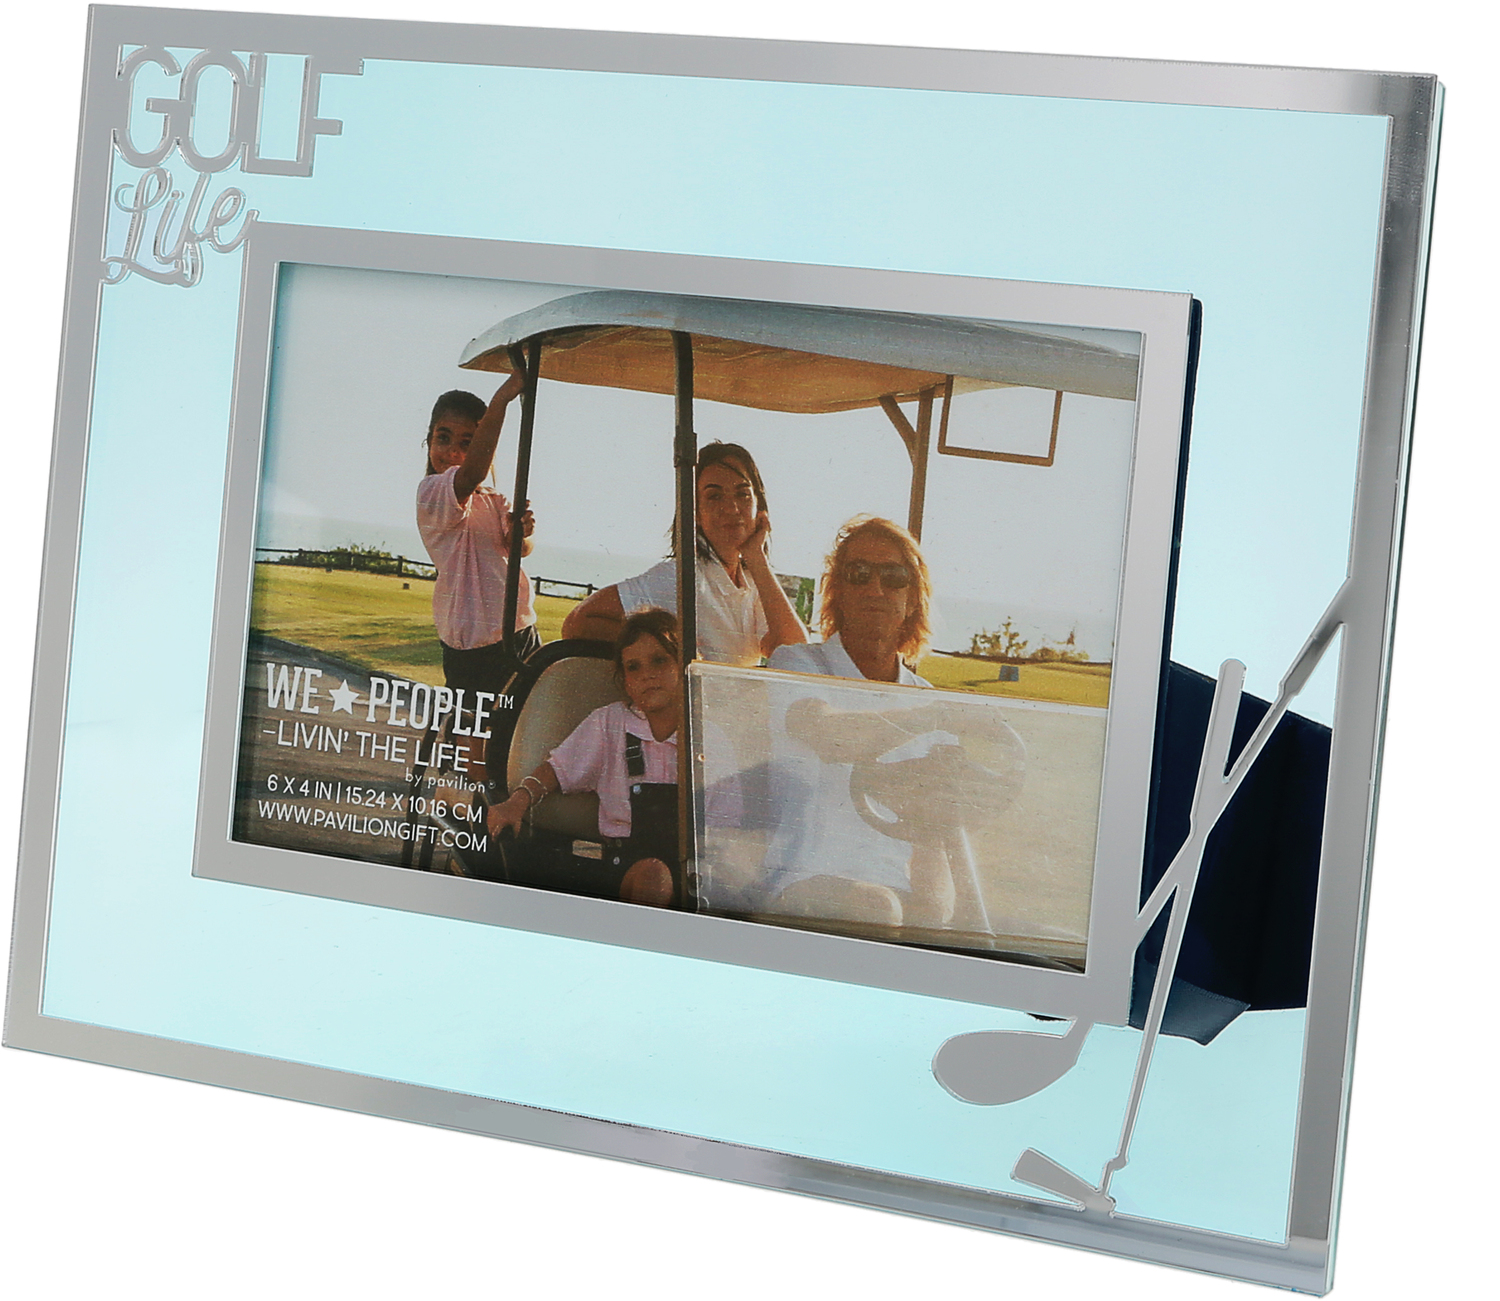 Golf Life by We People - Golf Life - 8.5" x 6.5" Glass Frame (Holds 6" x 4" Photo)